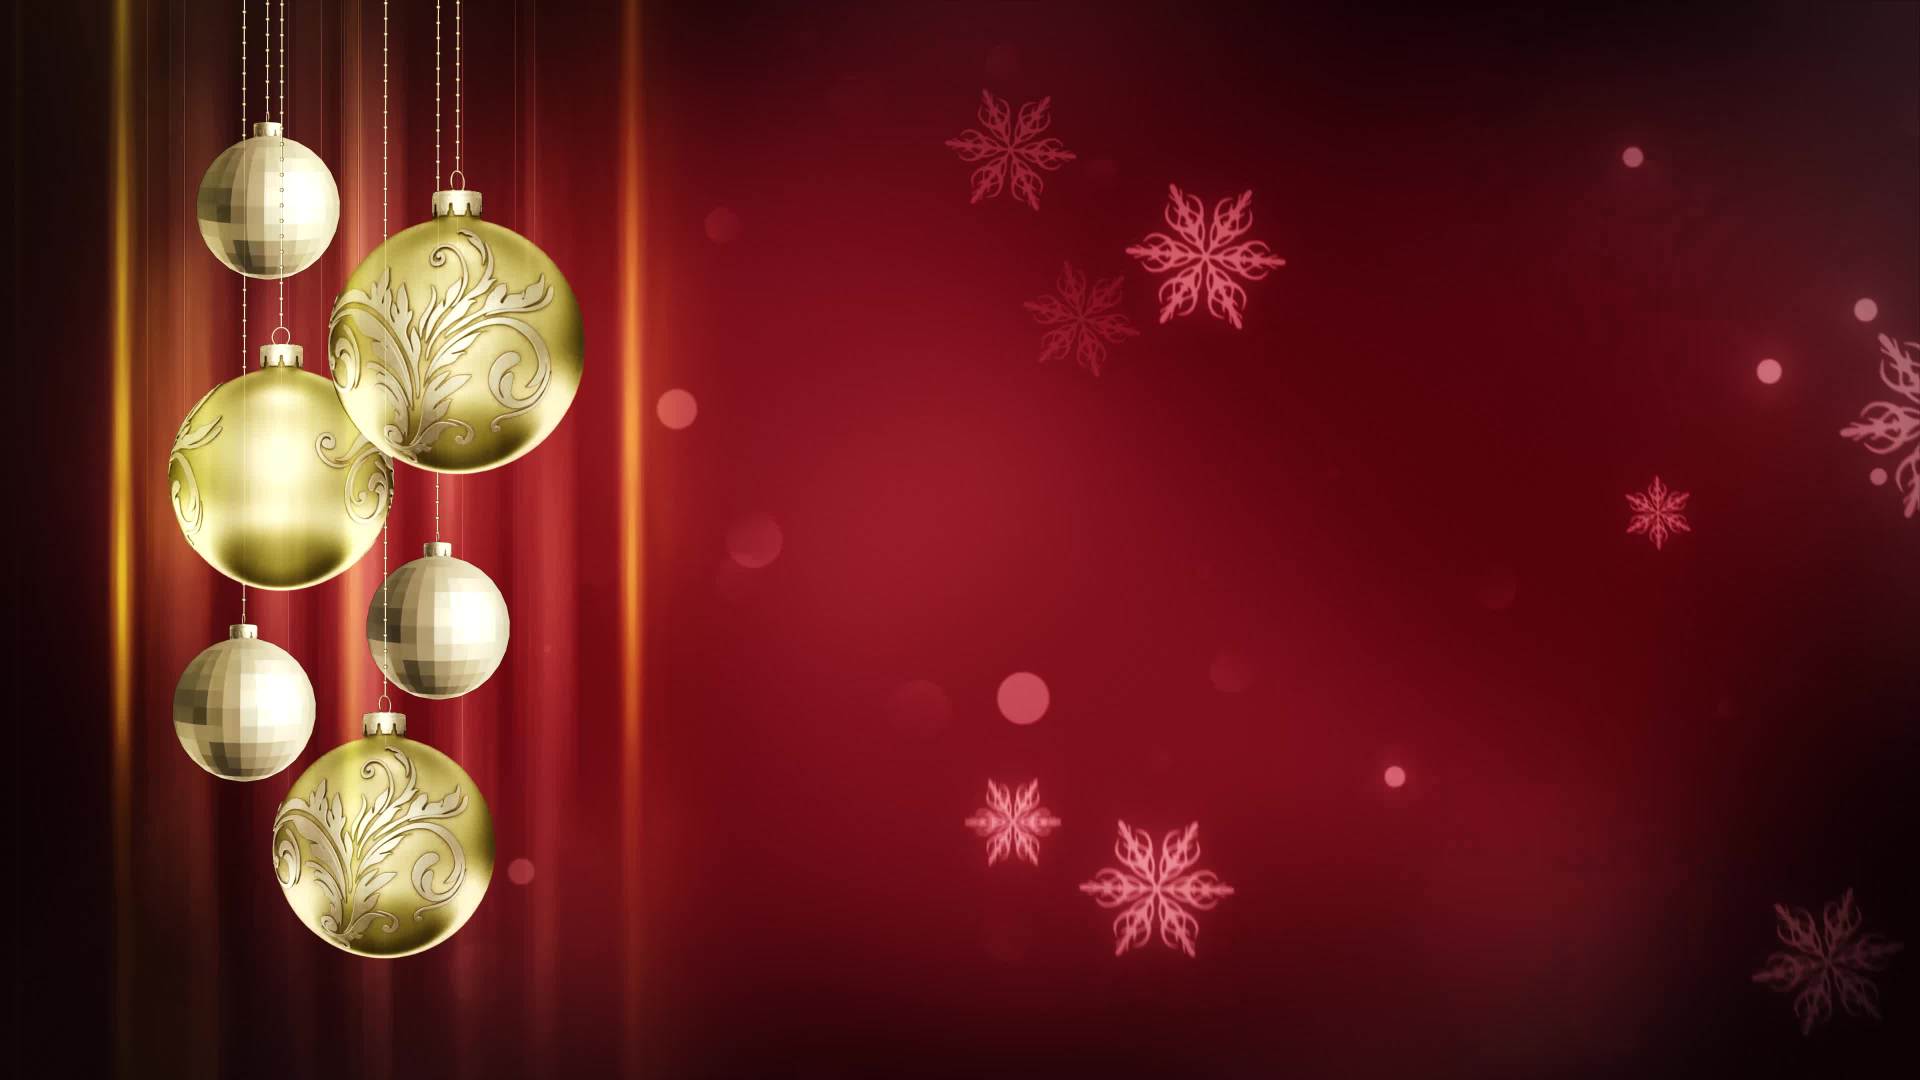 Red & Gold Ornaments 4K Christmas Motion Background Loop HD Video Clips & Stock Video Footage at Videezy!